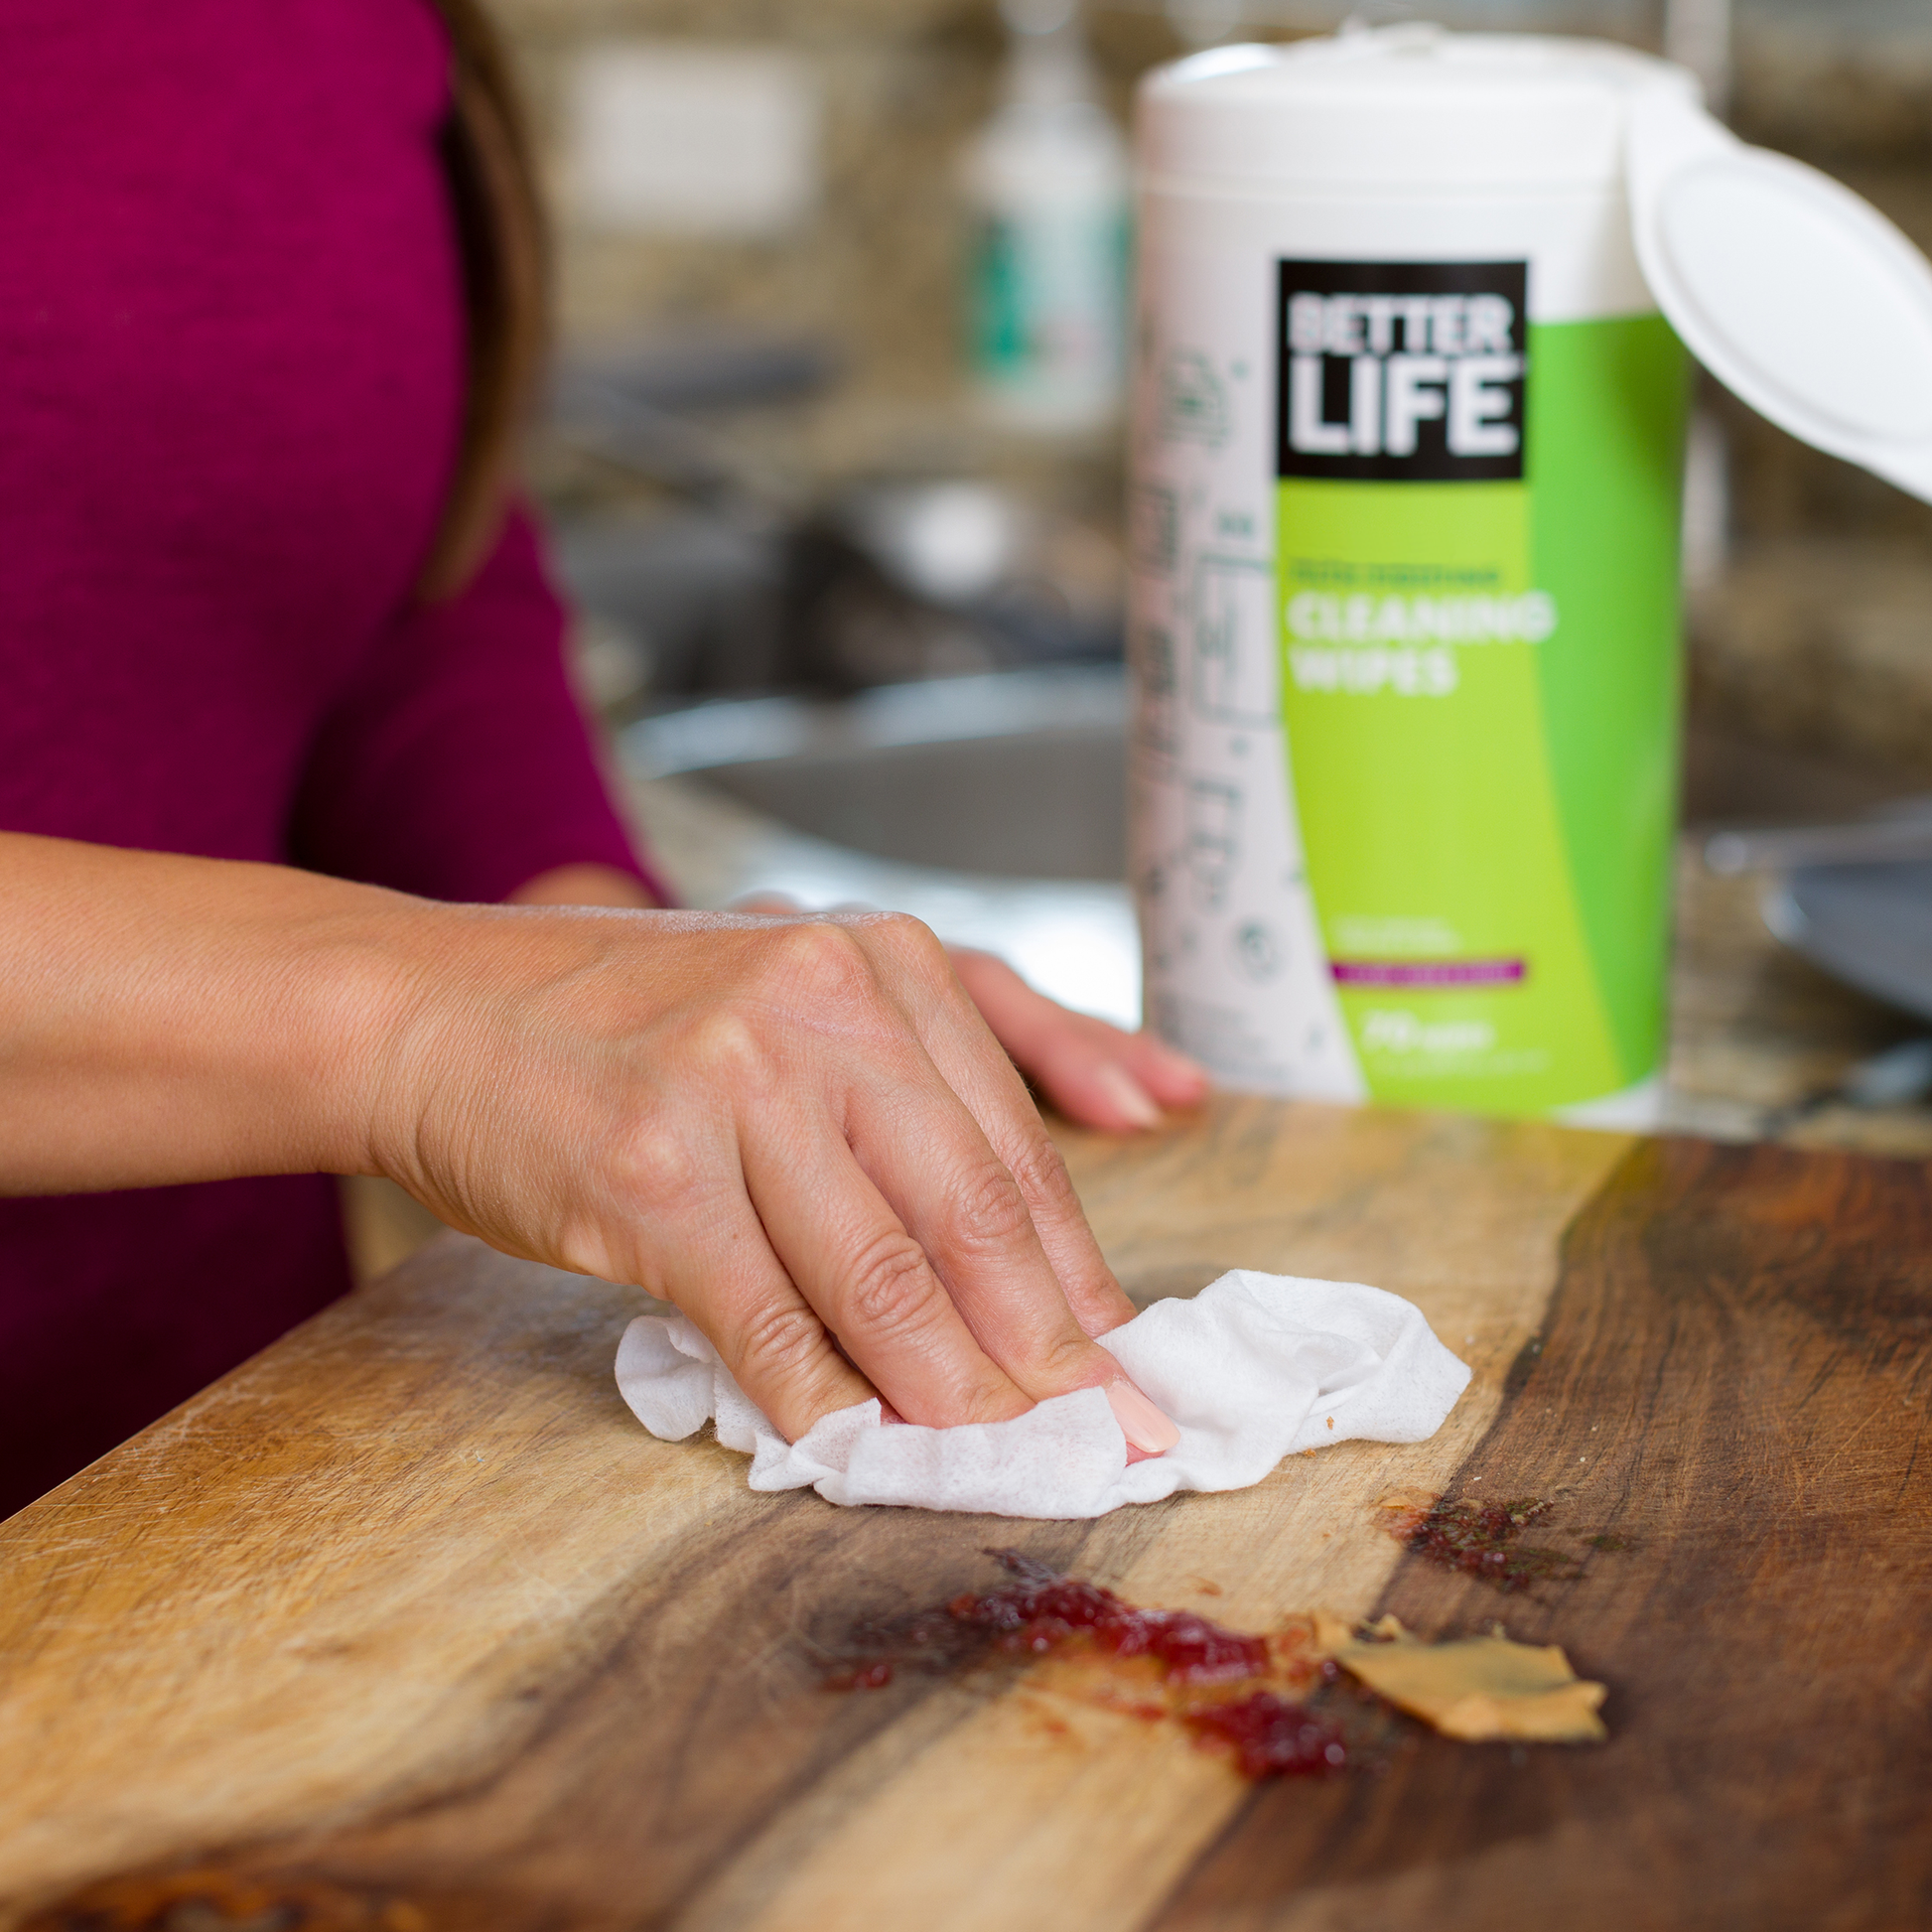 Juniper+Clean+Surface+Cleaning+Wipes+All-Purpose+Cleaner+With+